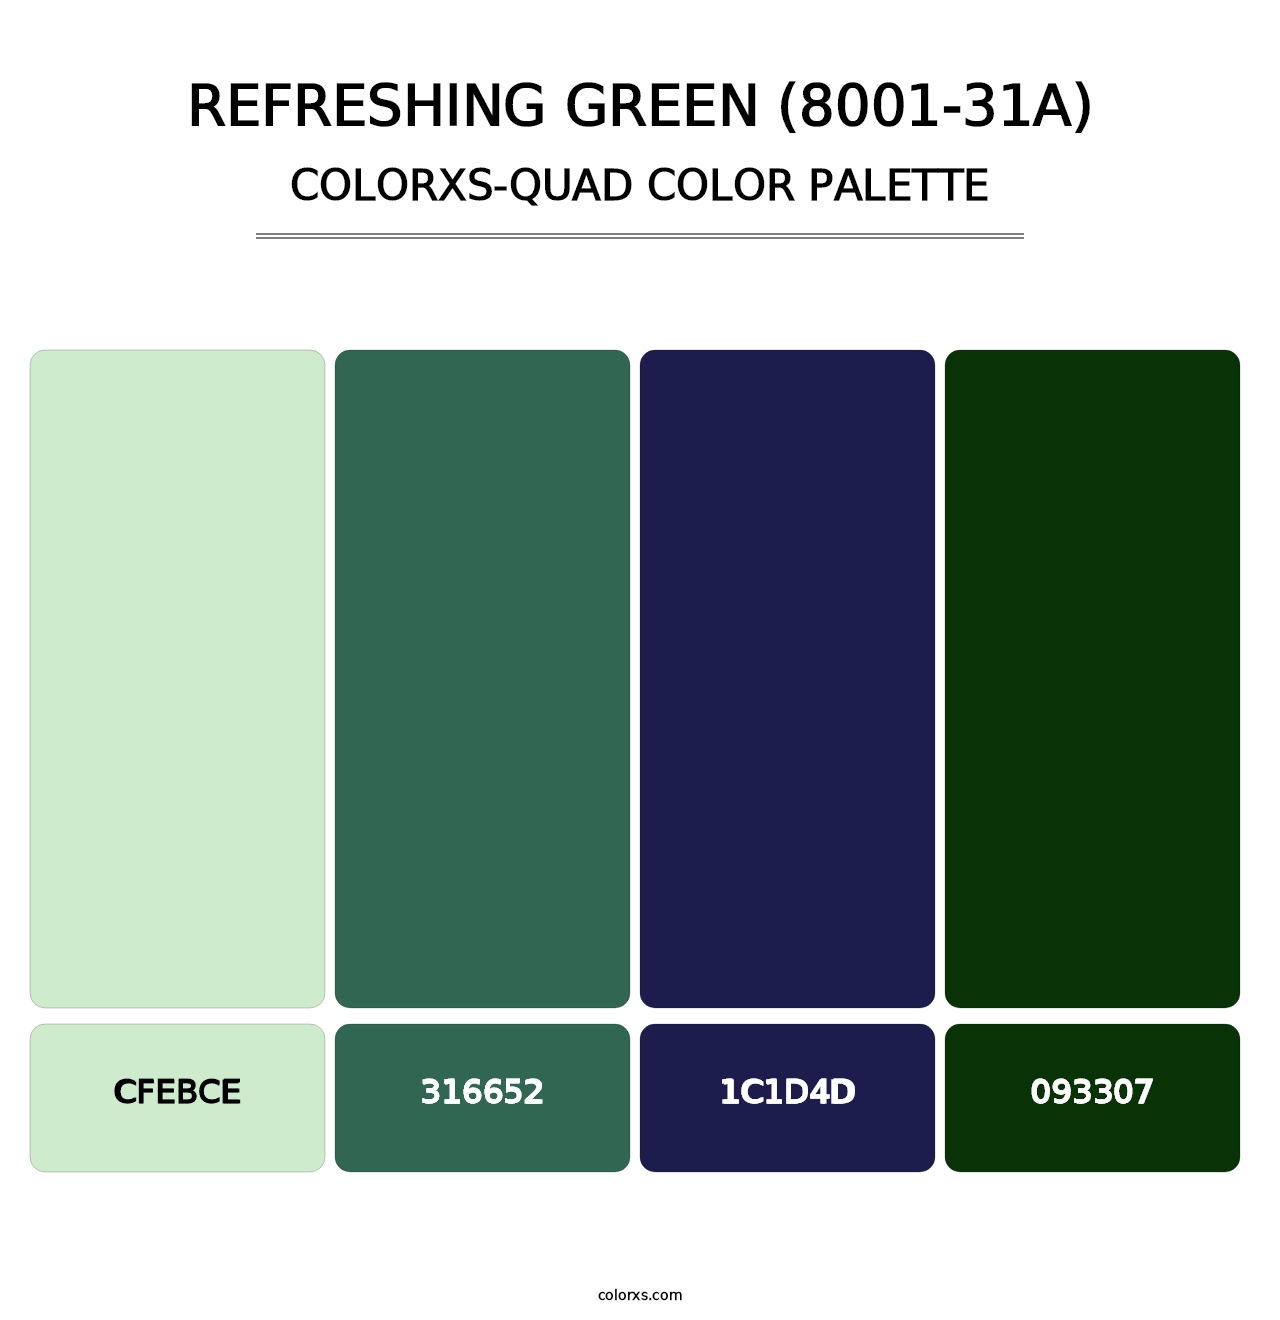 Refreshing Green (8001-31A) - Colorxs Quad Palette